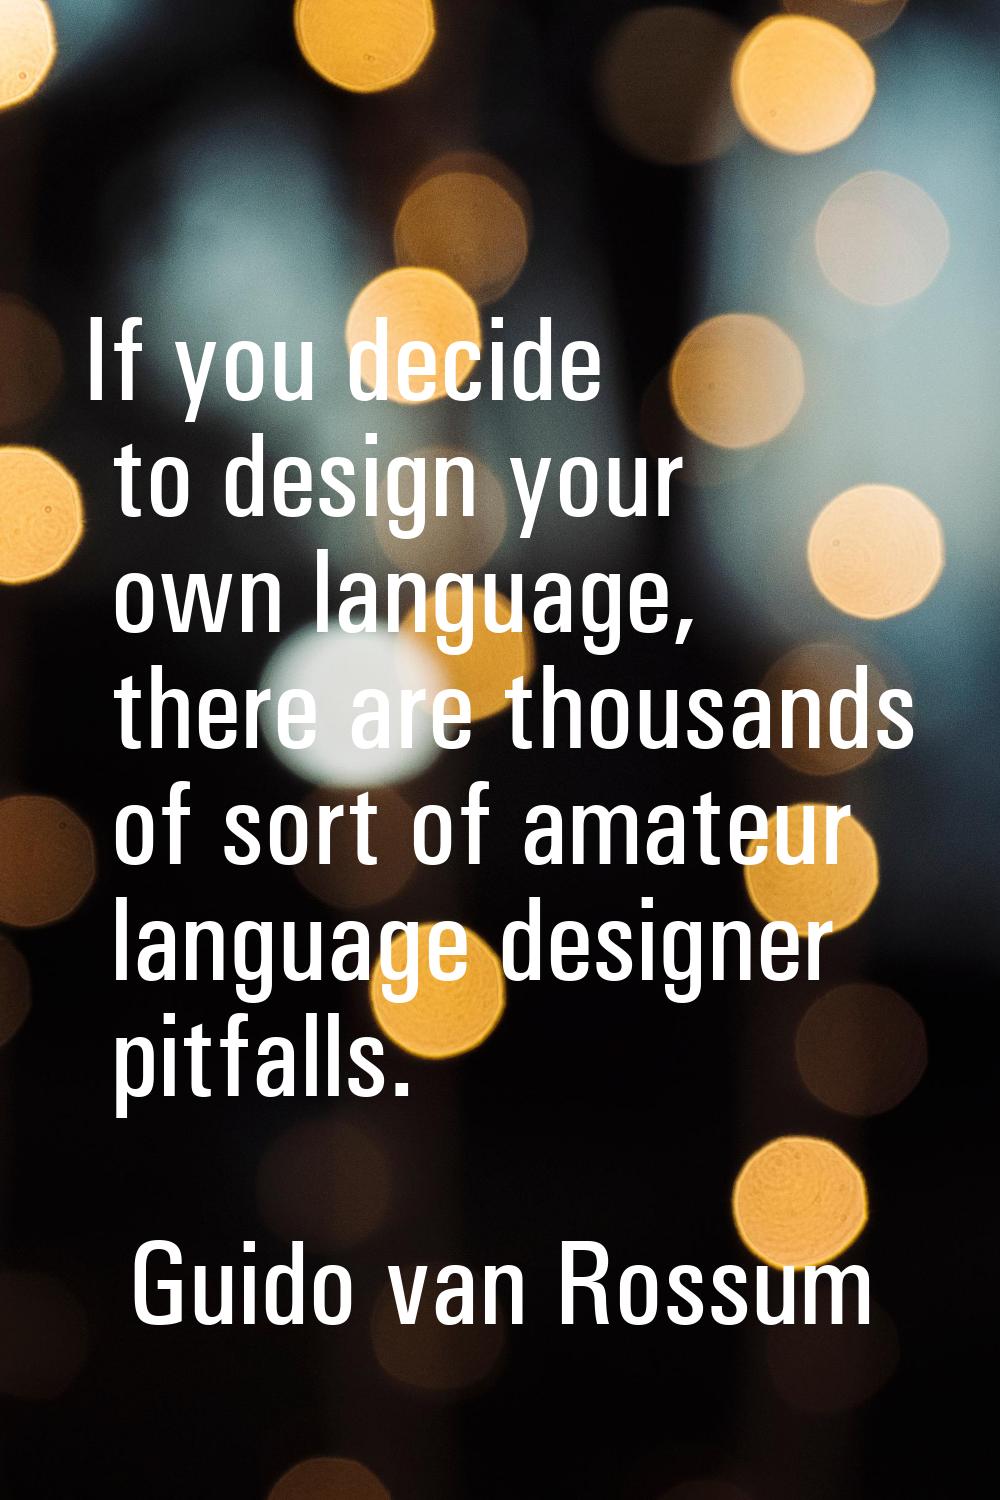 If you decide to design your own language, there are thousands of sort of amateur language designer